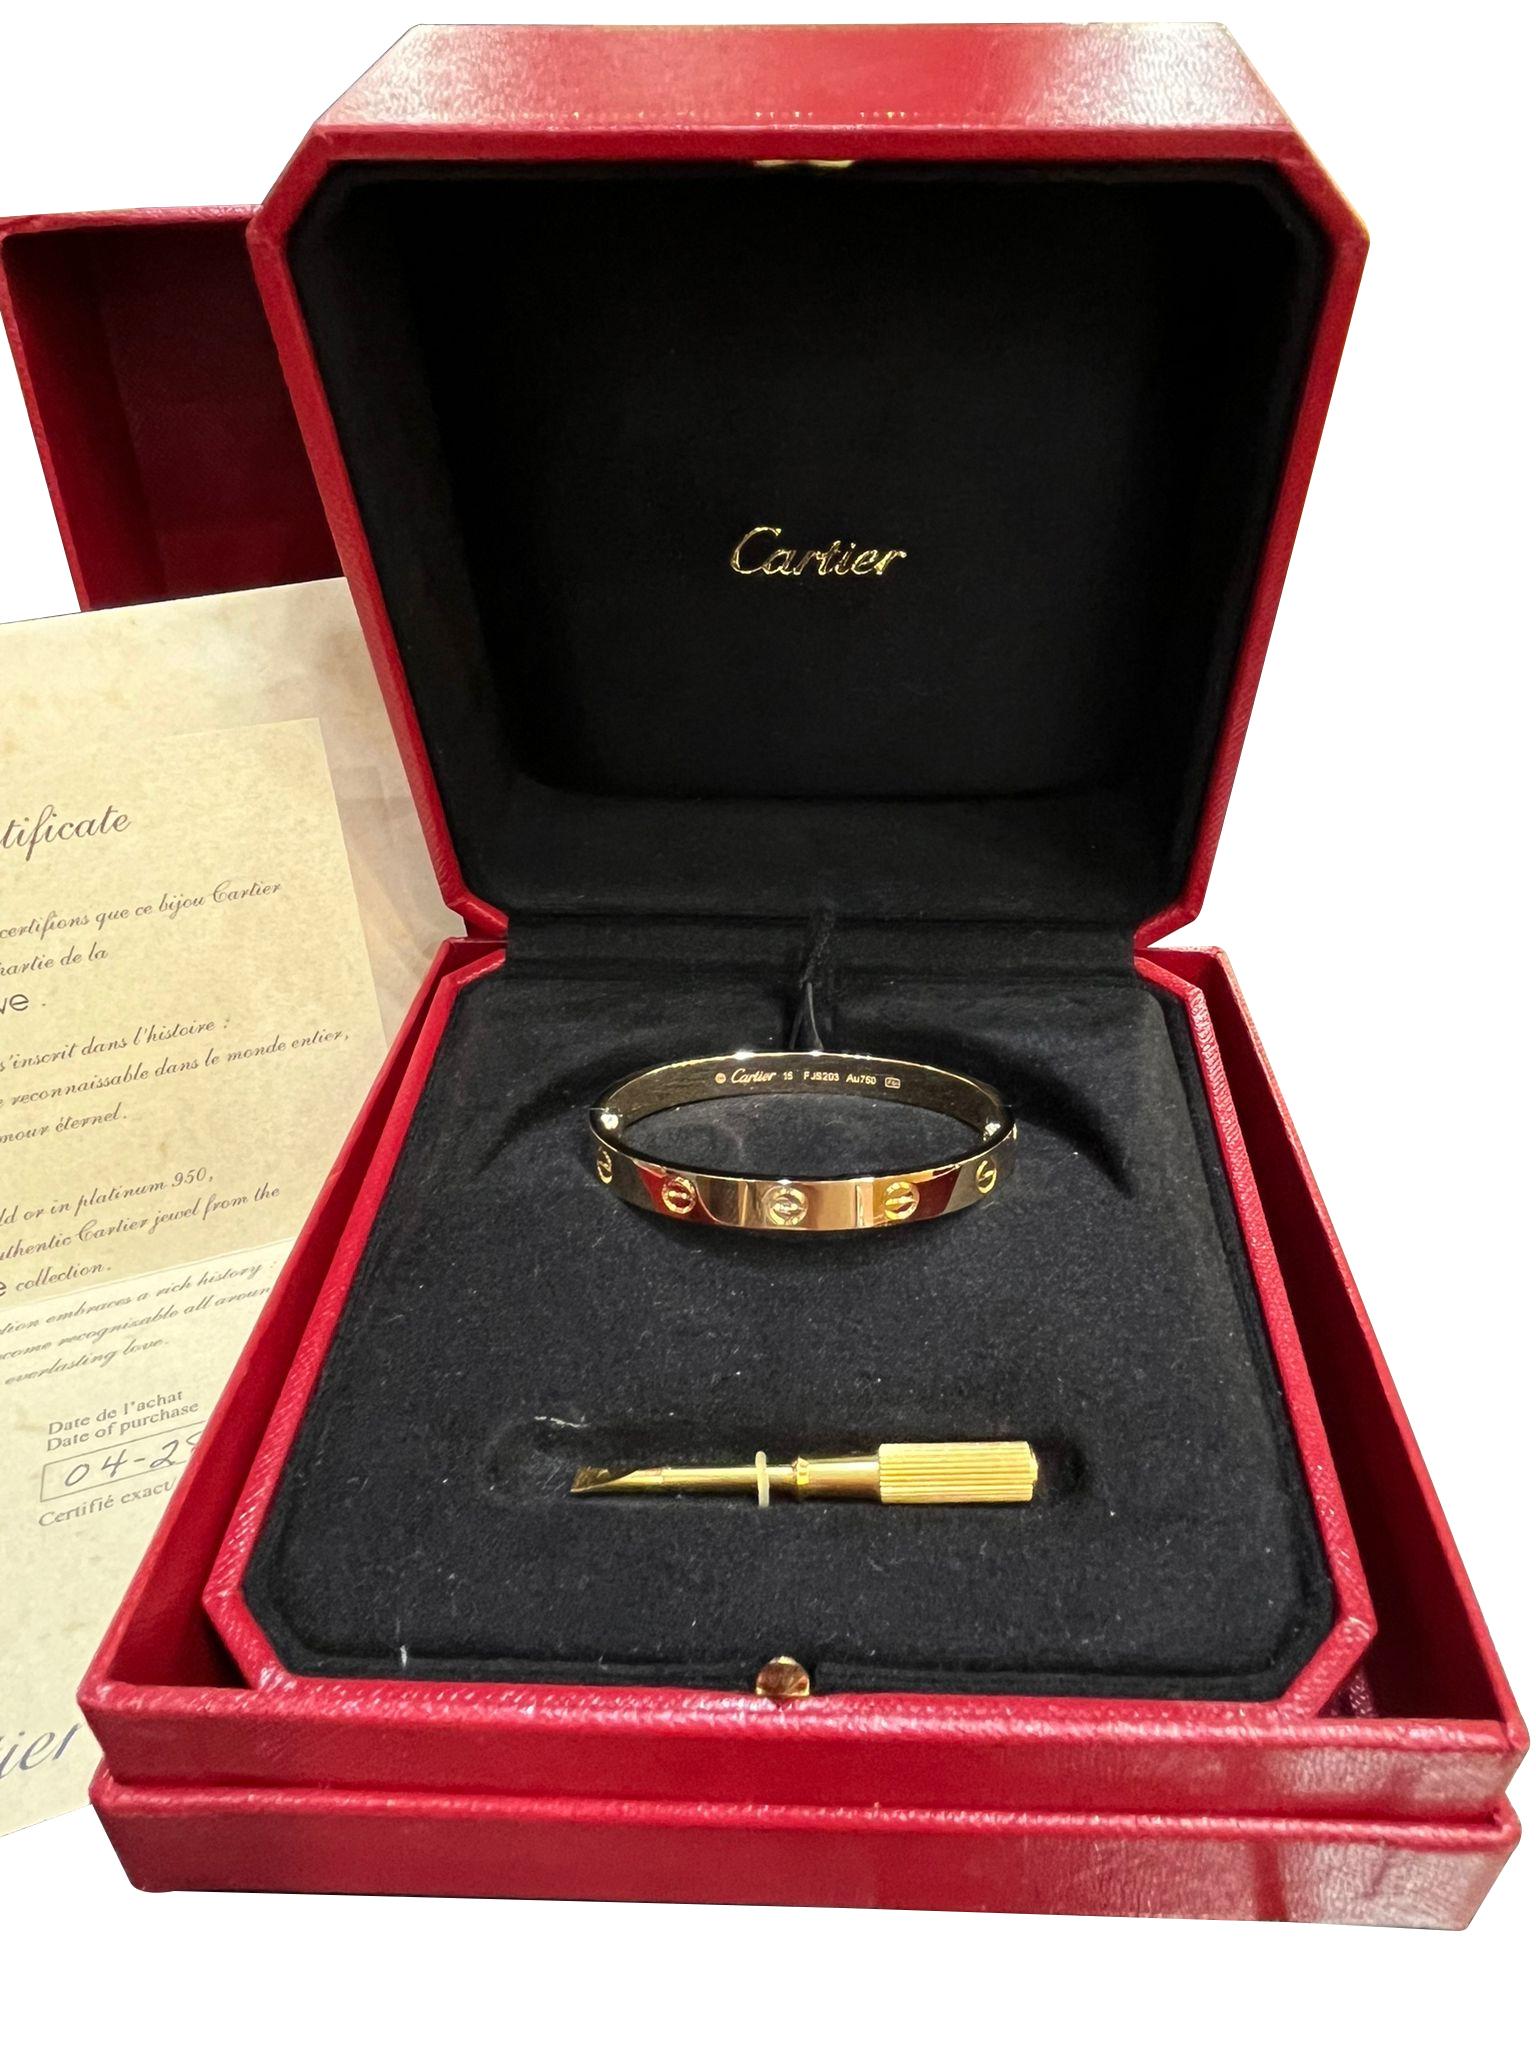 Cartier Love Bracelet 18K Yellow Gold Size 15 Brushed Finish with Screwdriver For Sale 4